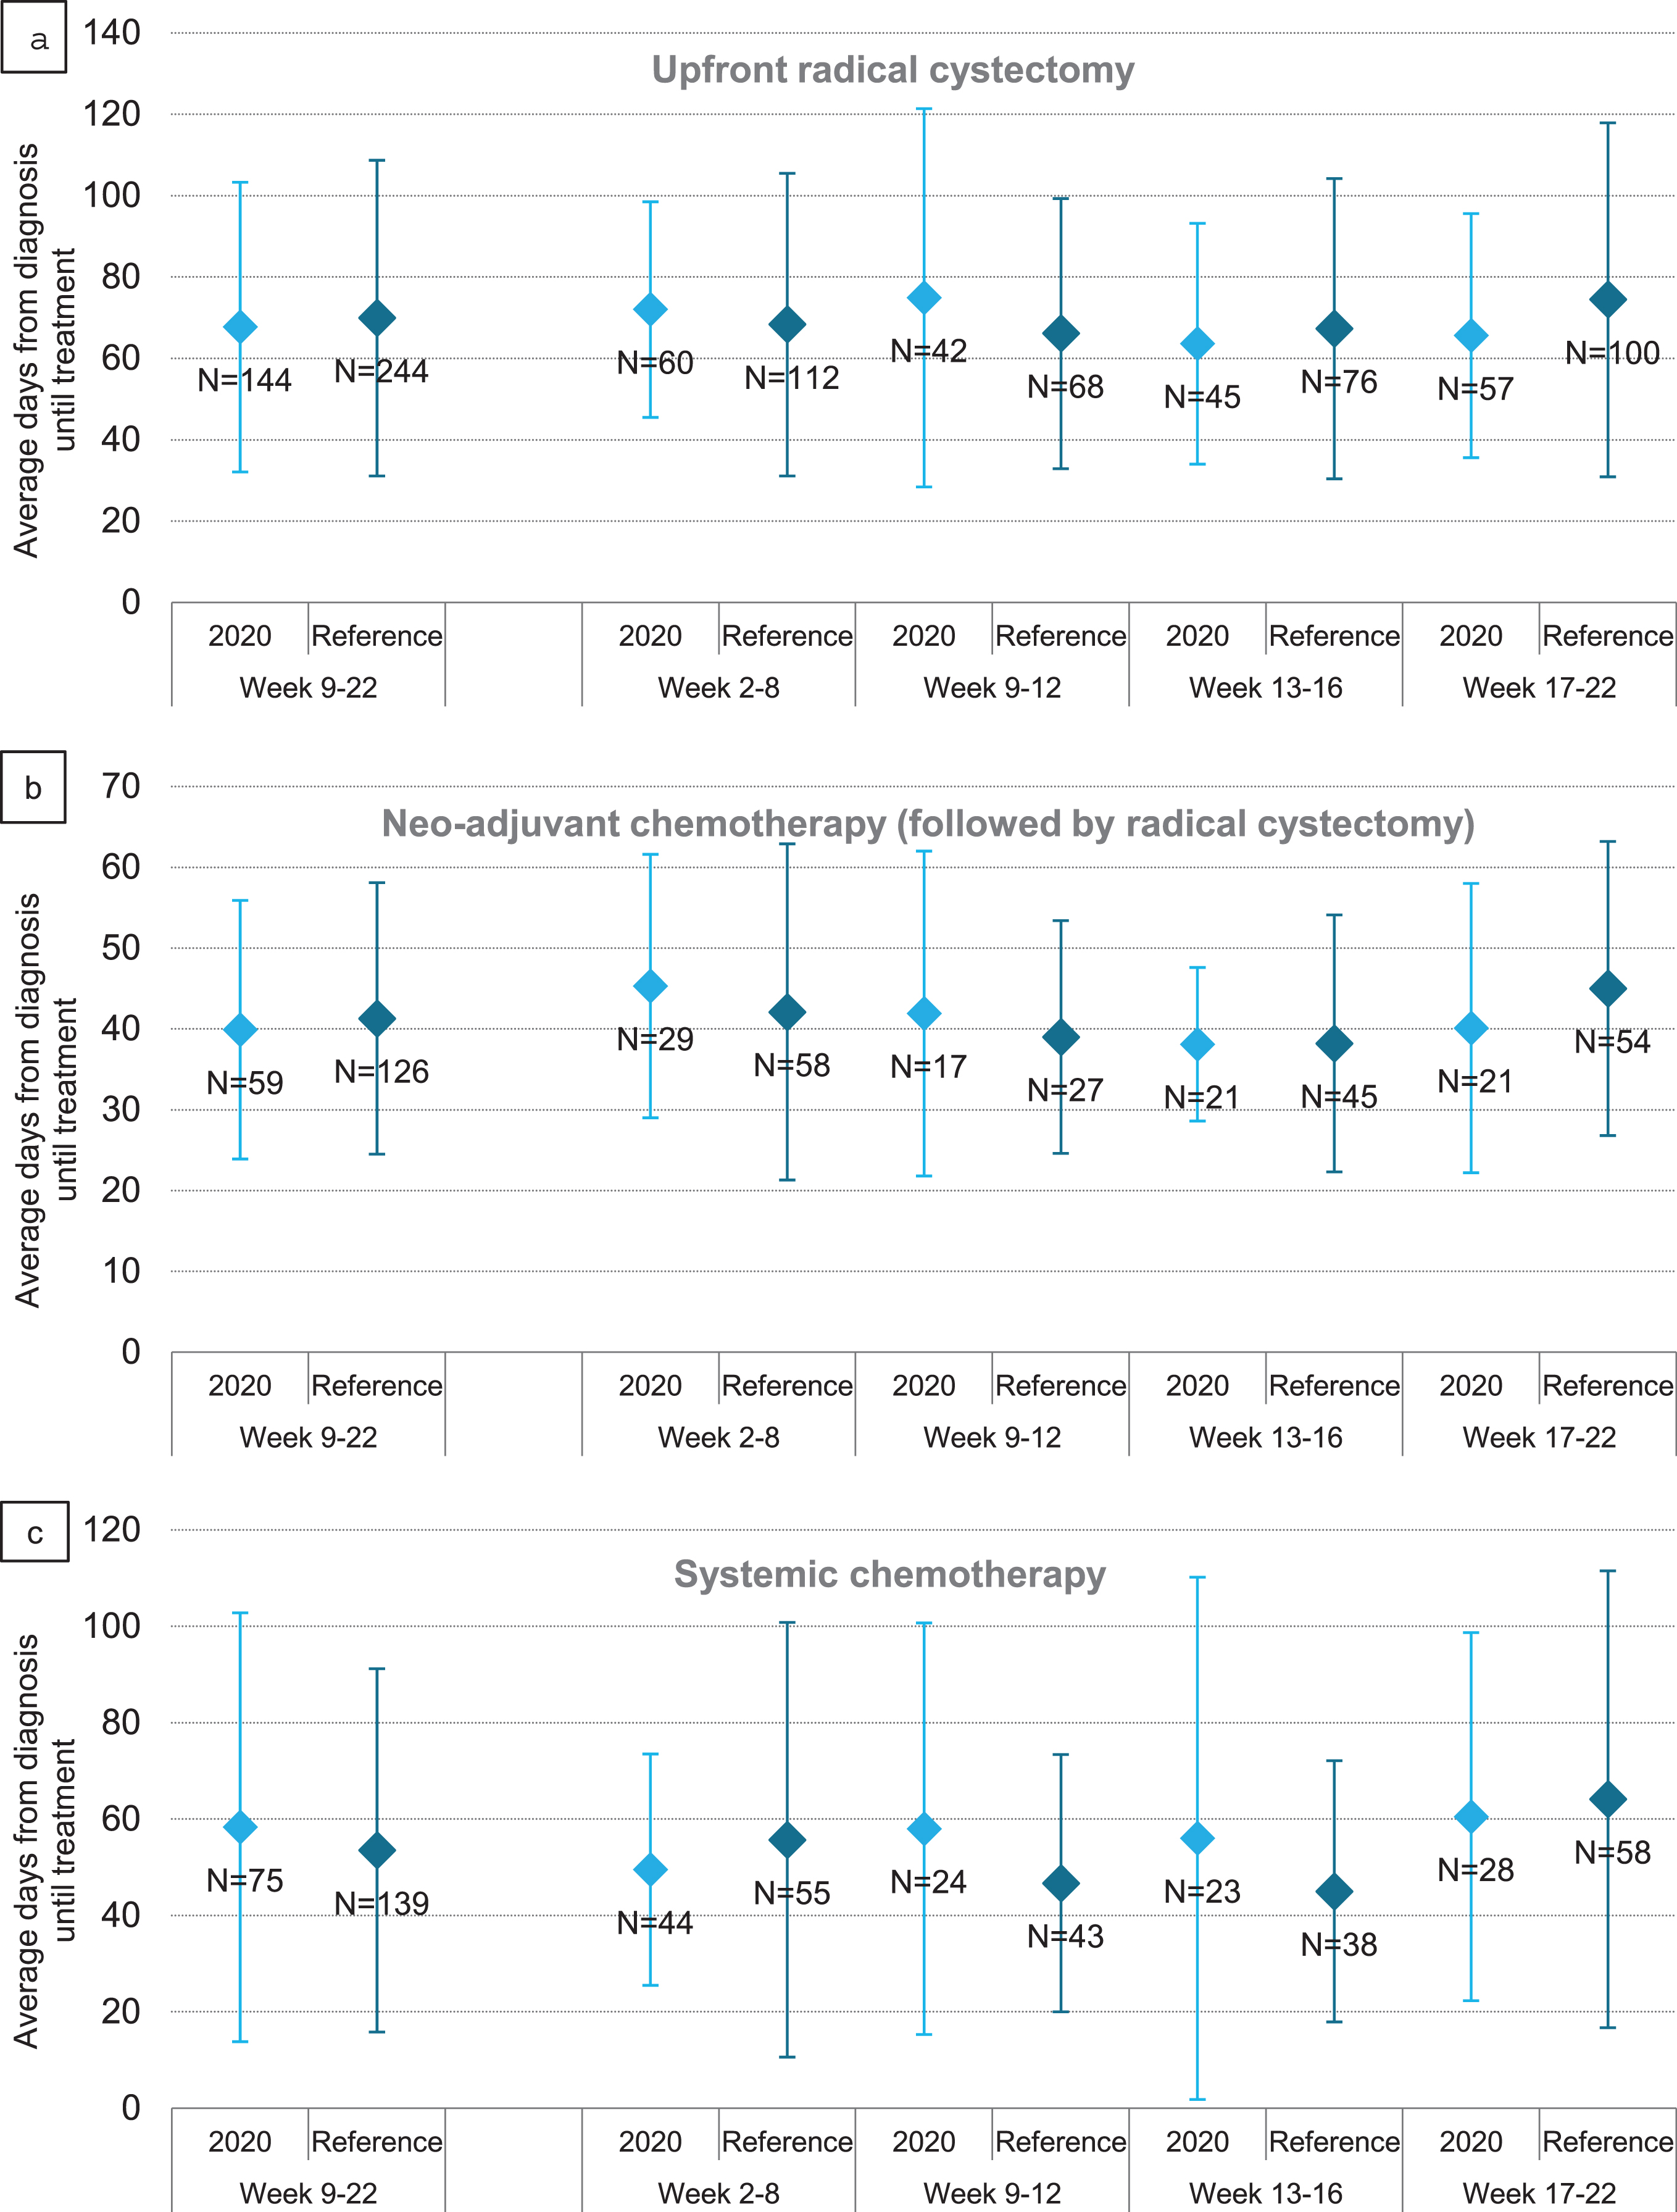 Average time and standard deviation to upfront radical cystectomy (a), neo-adjuvant chemotherapy followed by radical cystectomy (b) and systemic chemotherapy (c) in days of patients with bladder cancer per period of treatment in 2020, compared to the reference period 2018/2019.